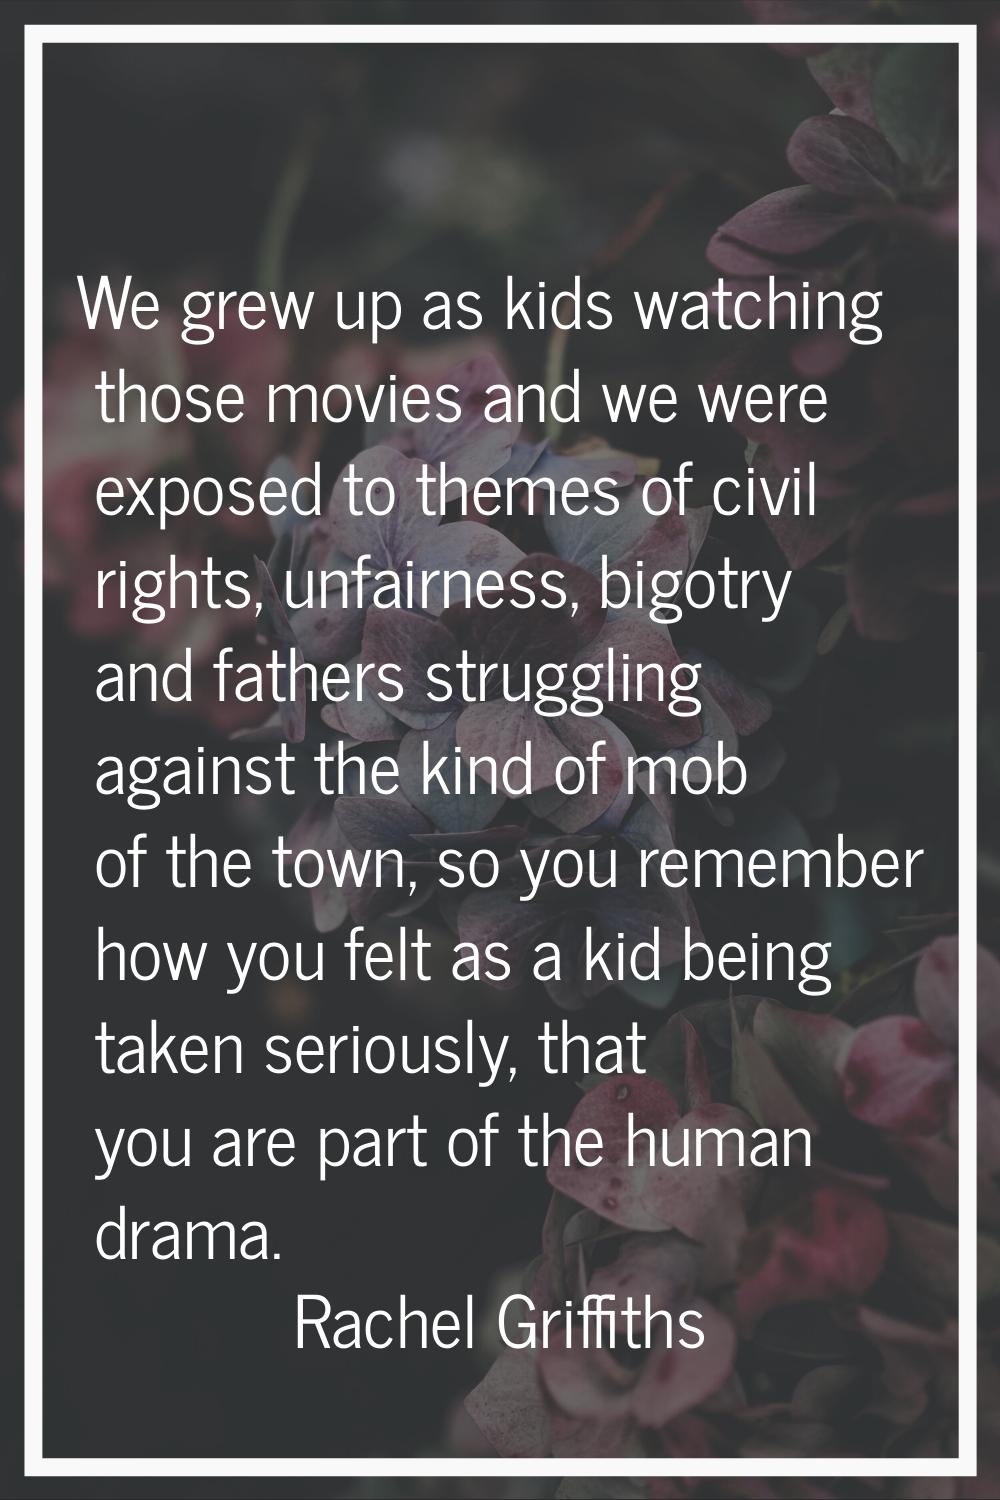 We grew up as kids watching those movies and we were exposed to themes of civil rights, unfairness,